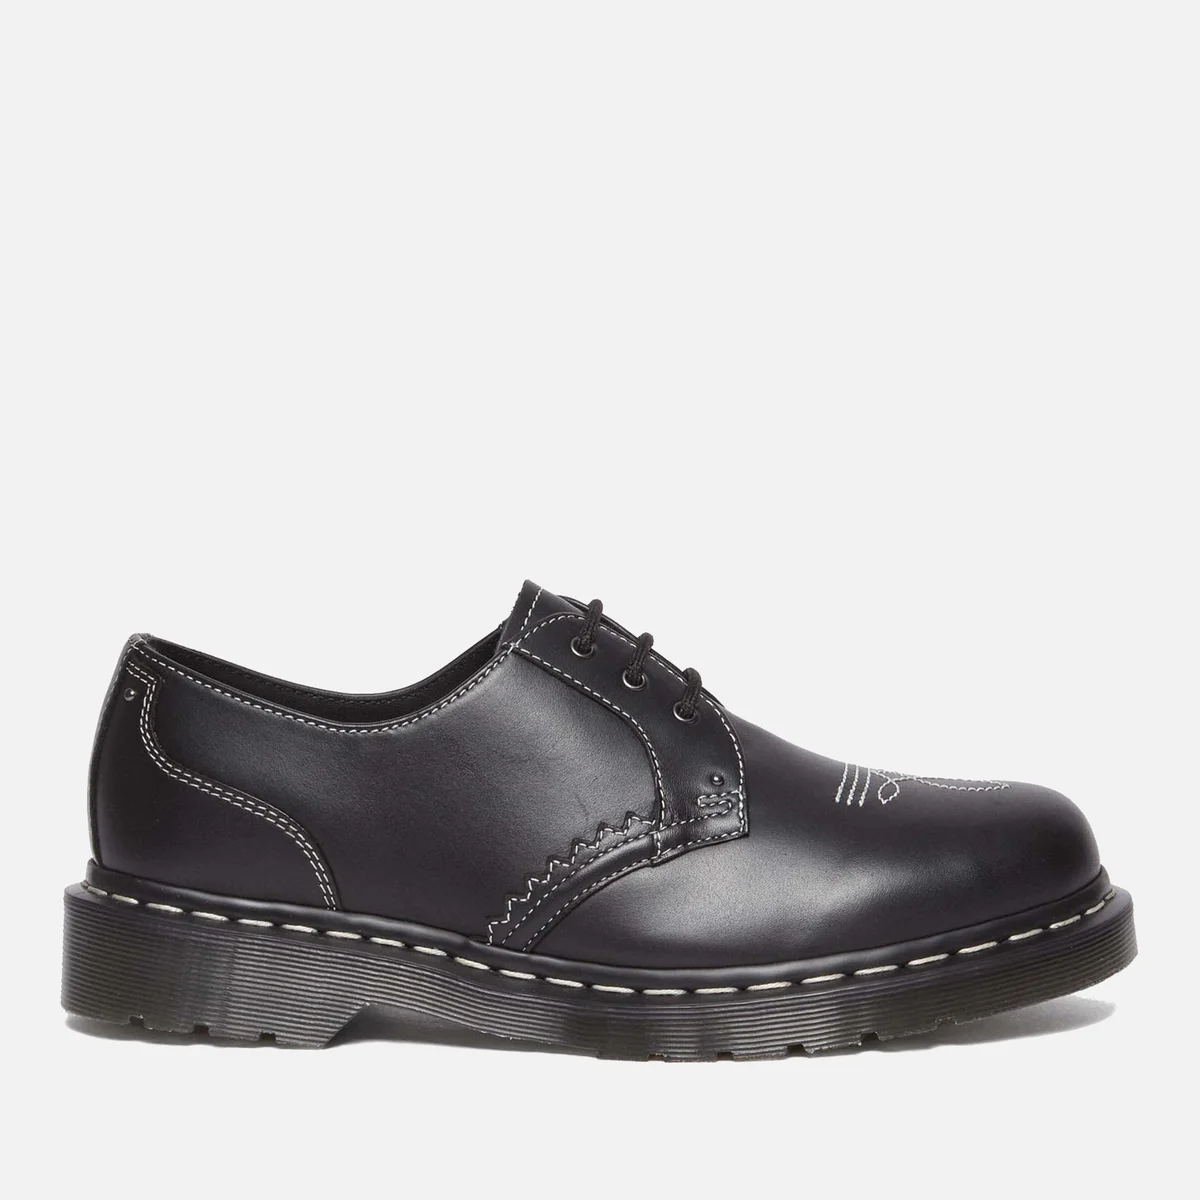 Dr. Martens 1461 Gothic Americana Leather Shoes Image 1